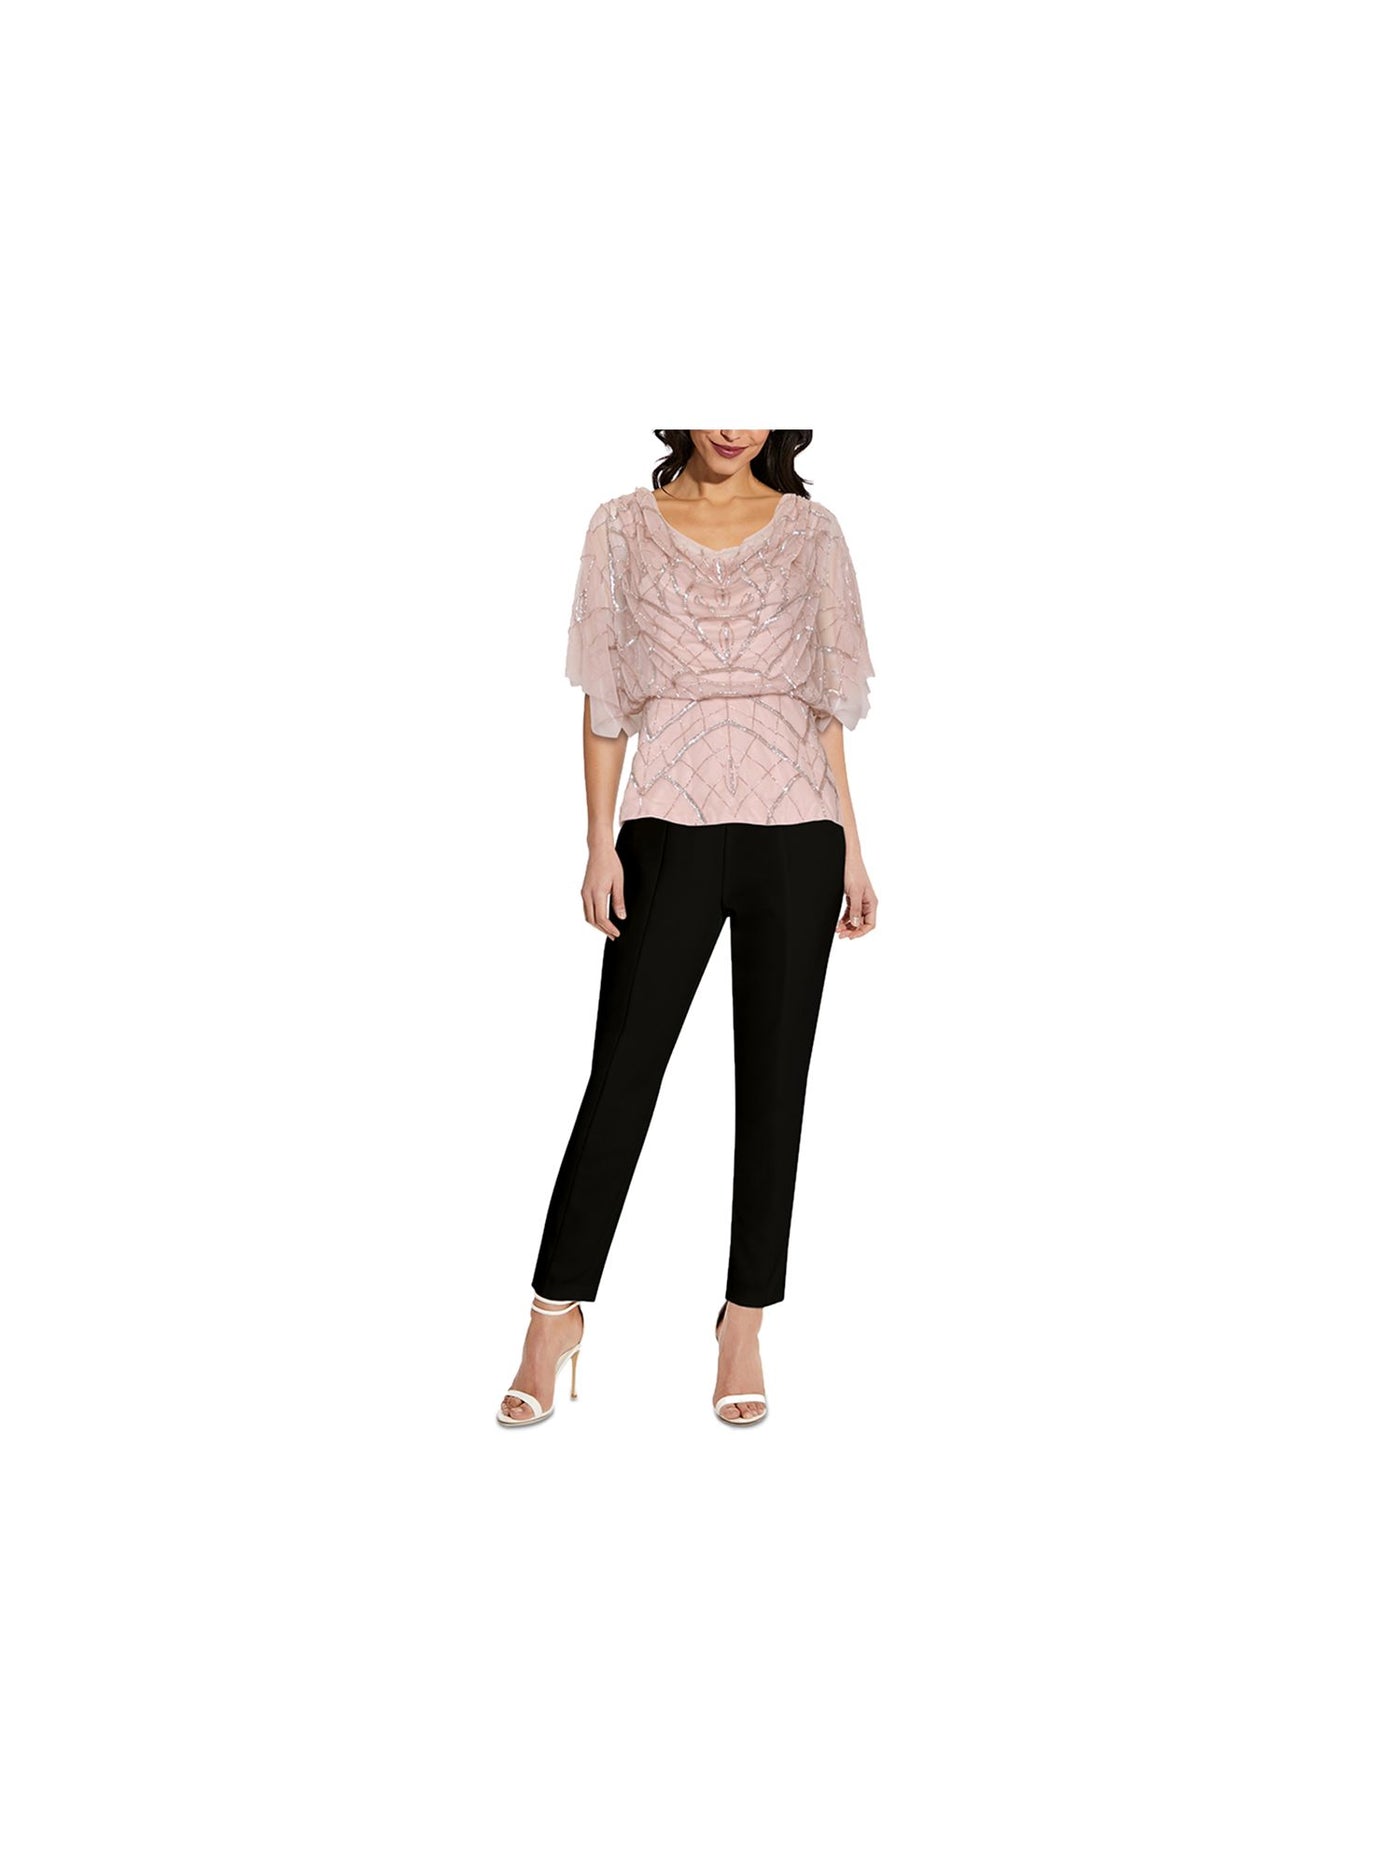 ADRIANNA PAPELL Womens Pink Zippered Beaded Sequin Embellished Flutter Sleeve Cowl Neck Party Top Plus 22W